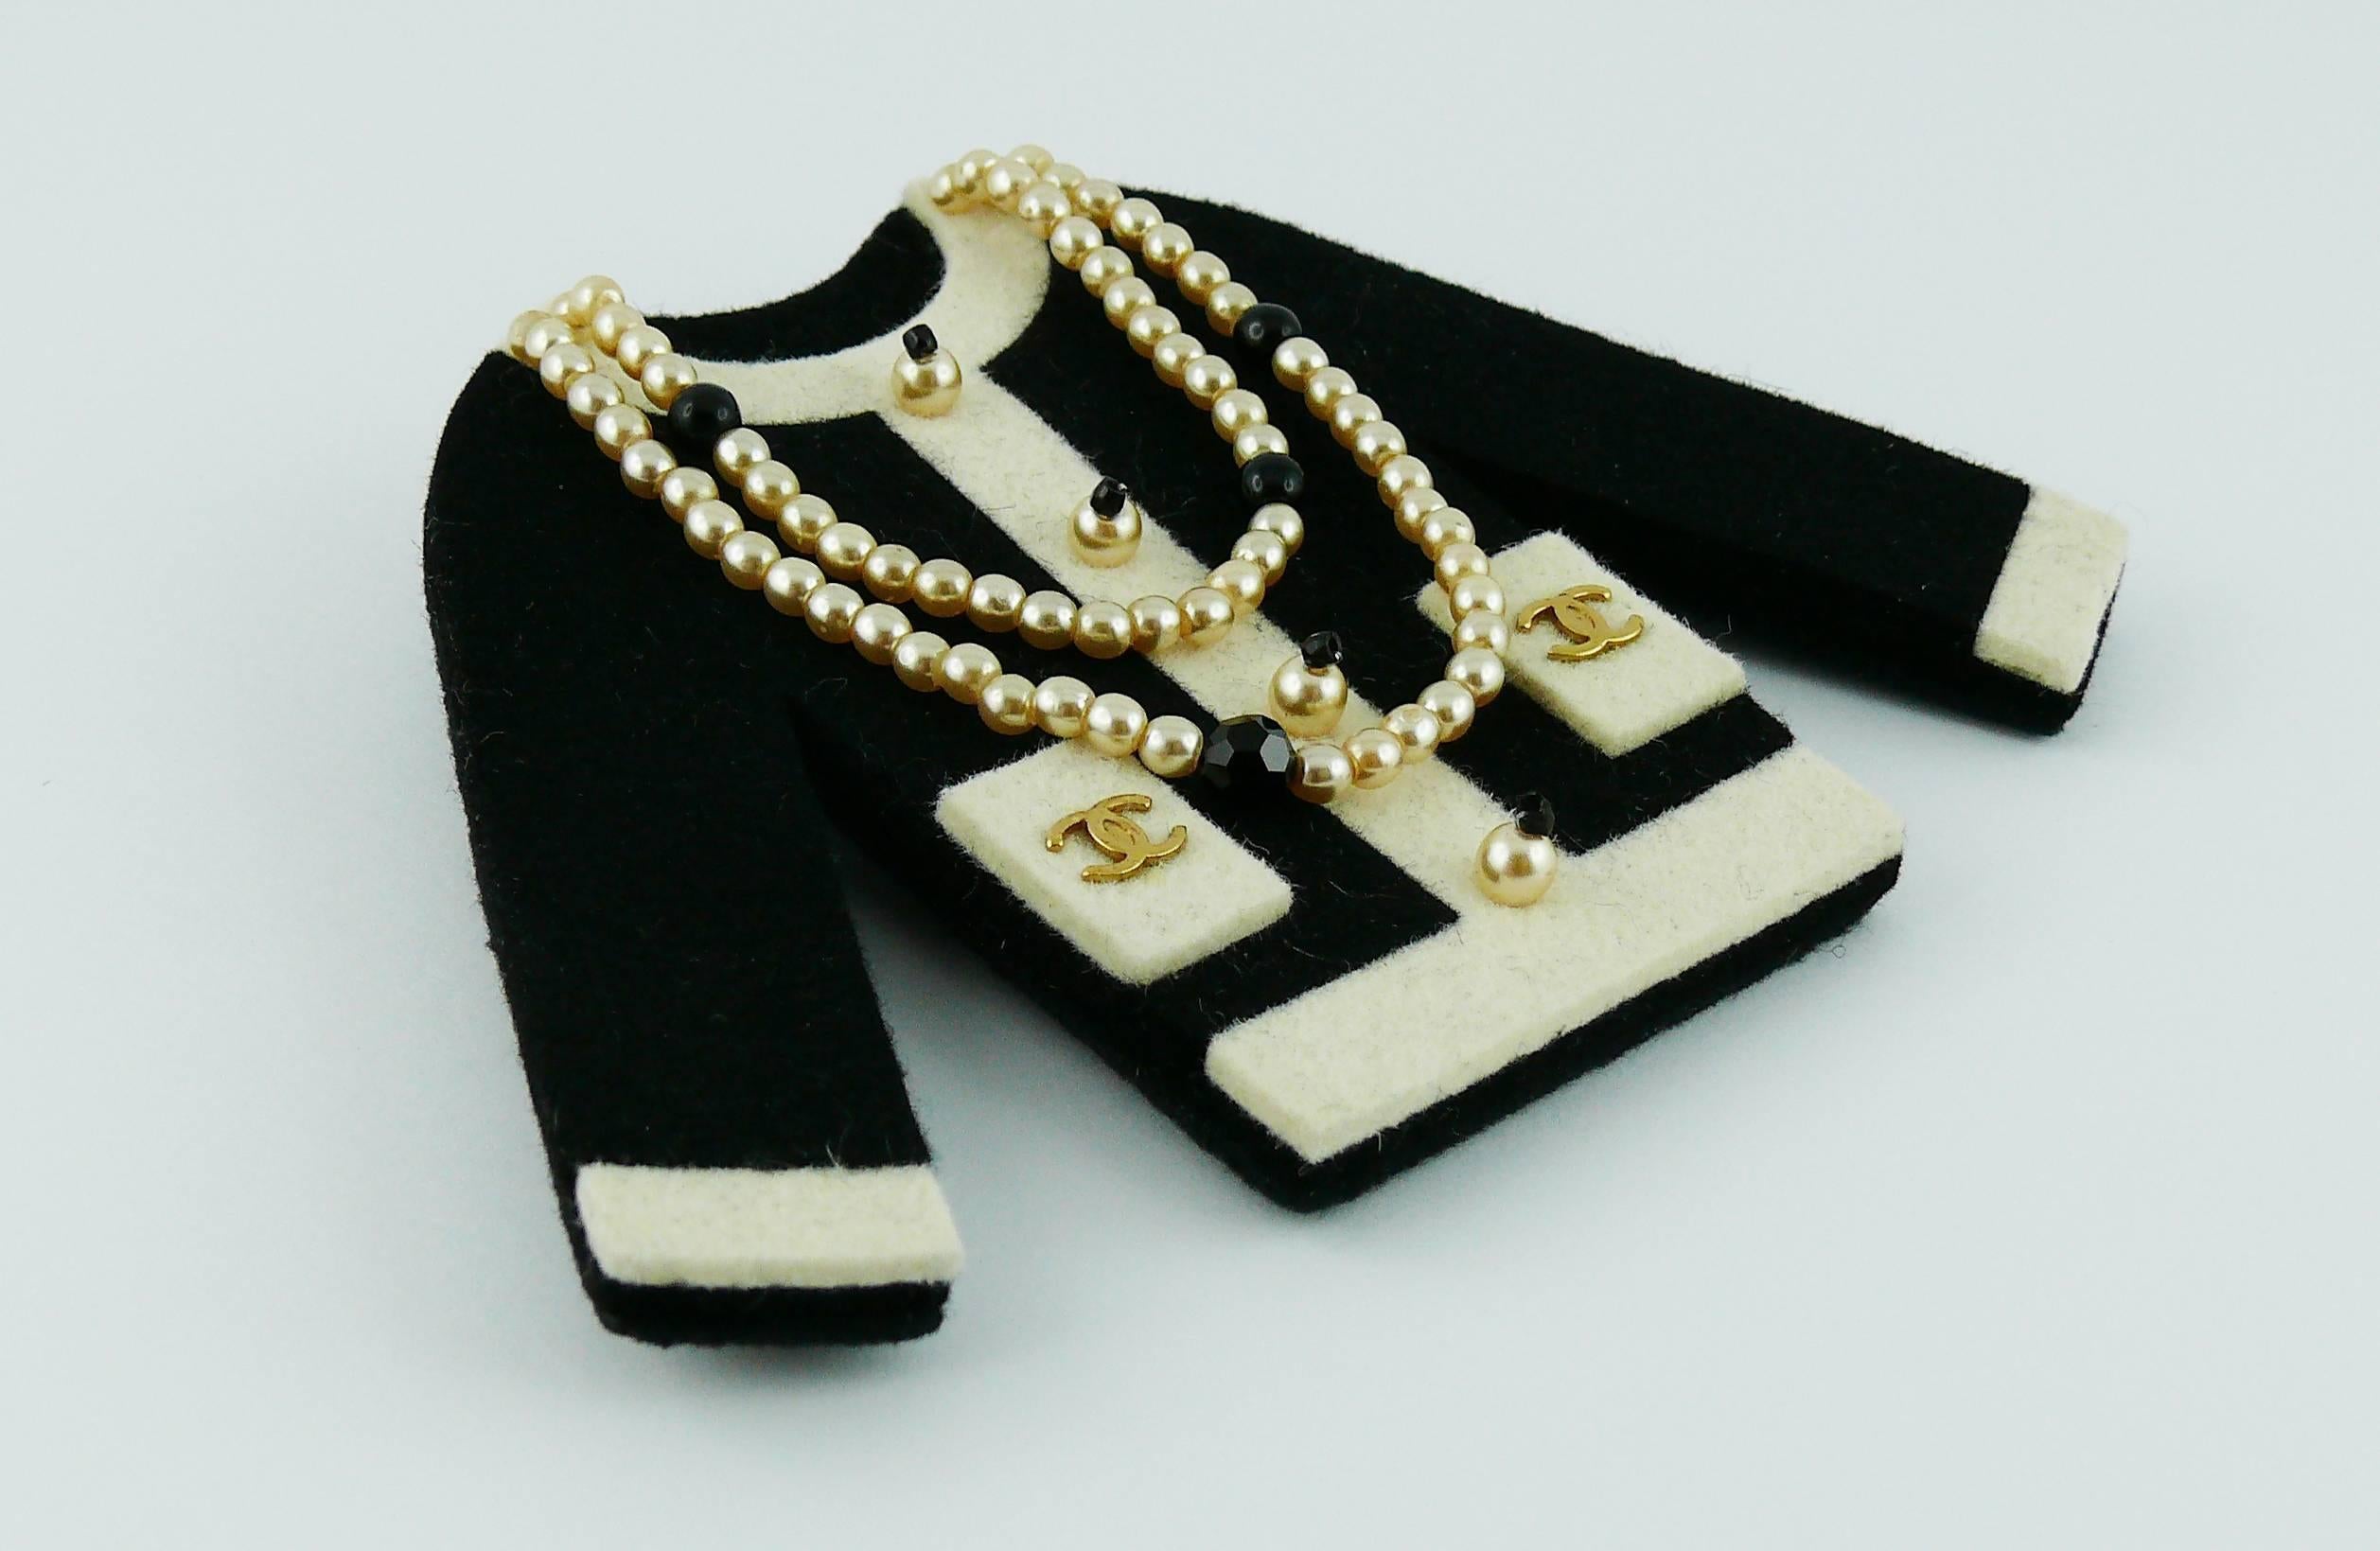 CHANEL large iconic little black jacket felt brooch with faux pearl sautoir necklace and gold tone CC monogram on front pockets.

Fall/Winter 2002.

Bar pin fastening.

Marked CHANEL 02 A Made in France.

Indicative mesaurements : length